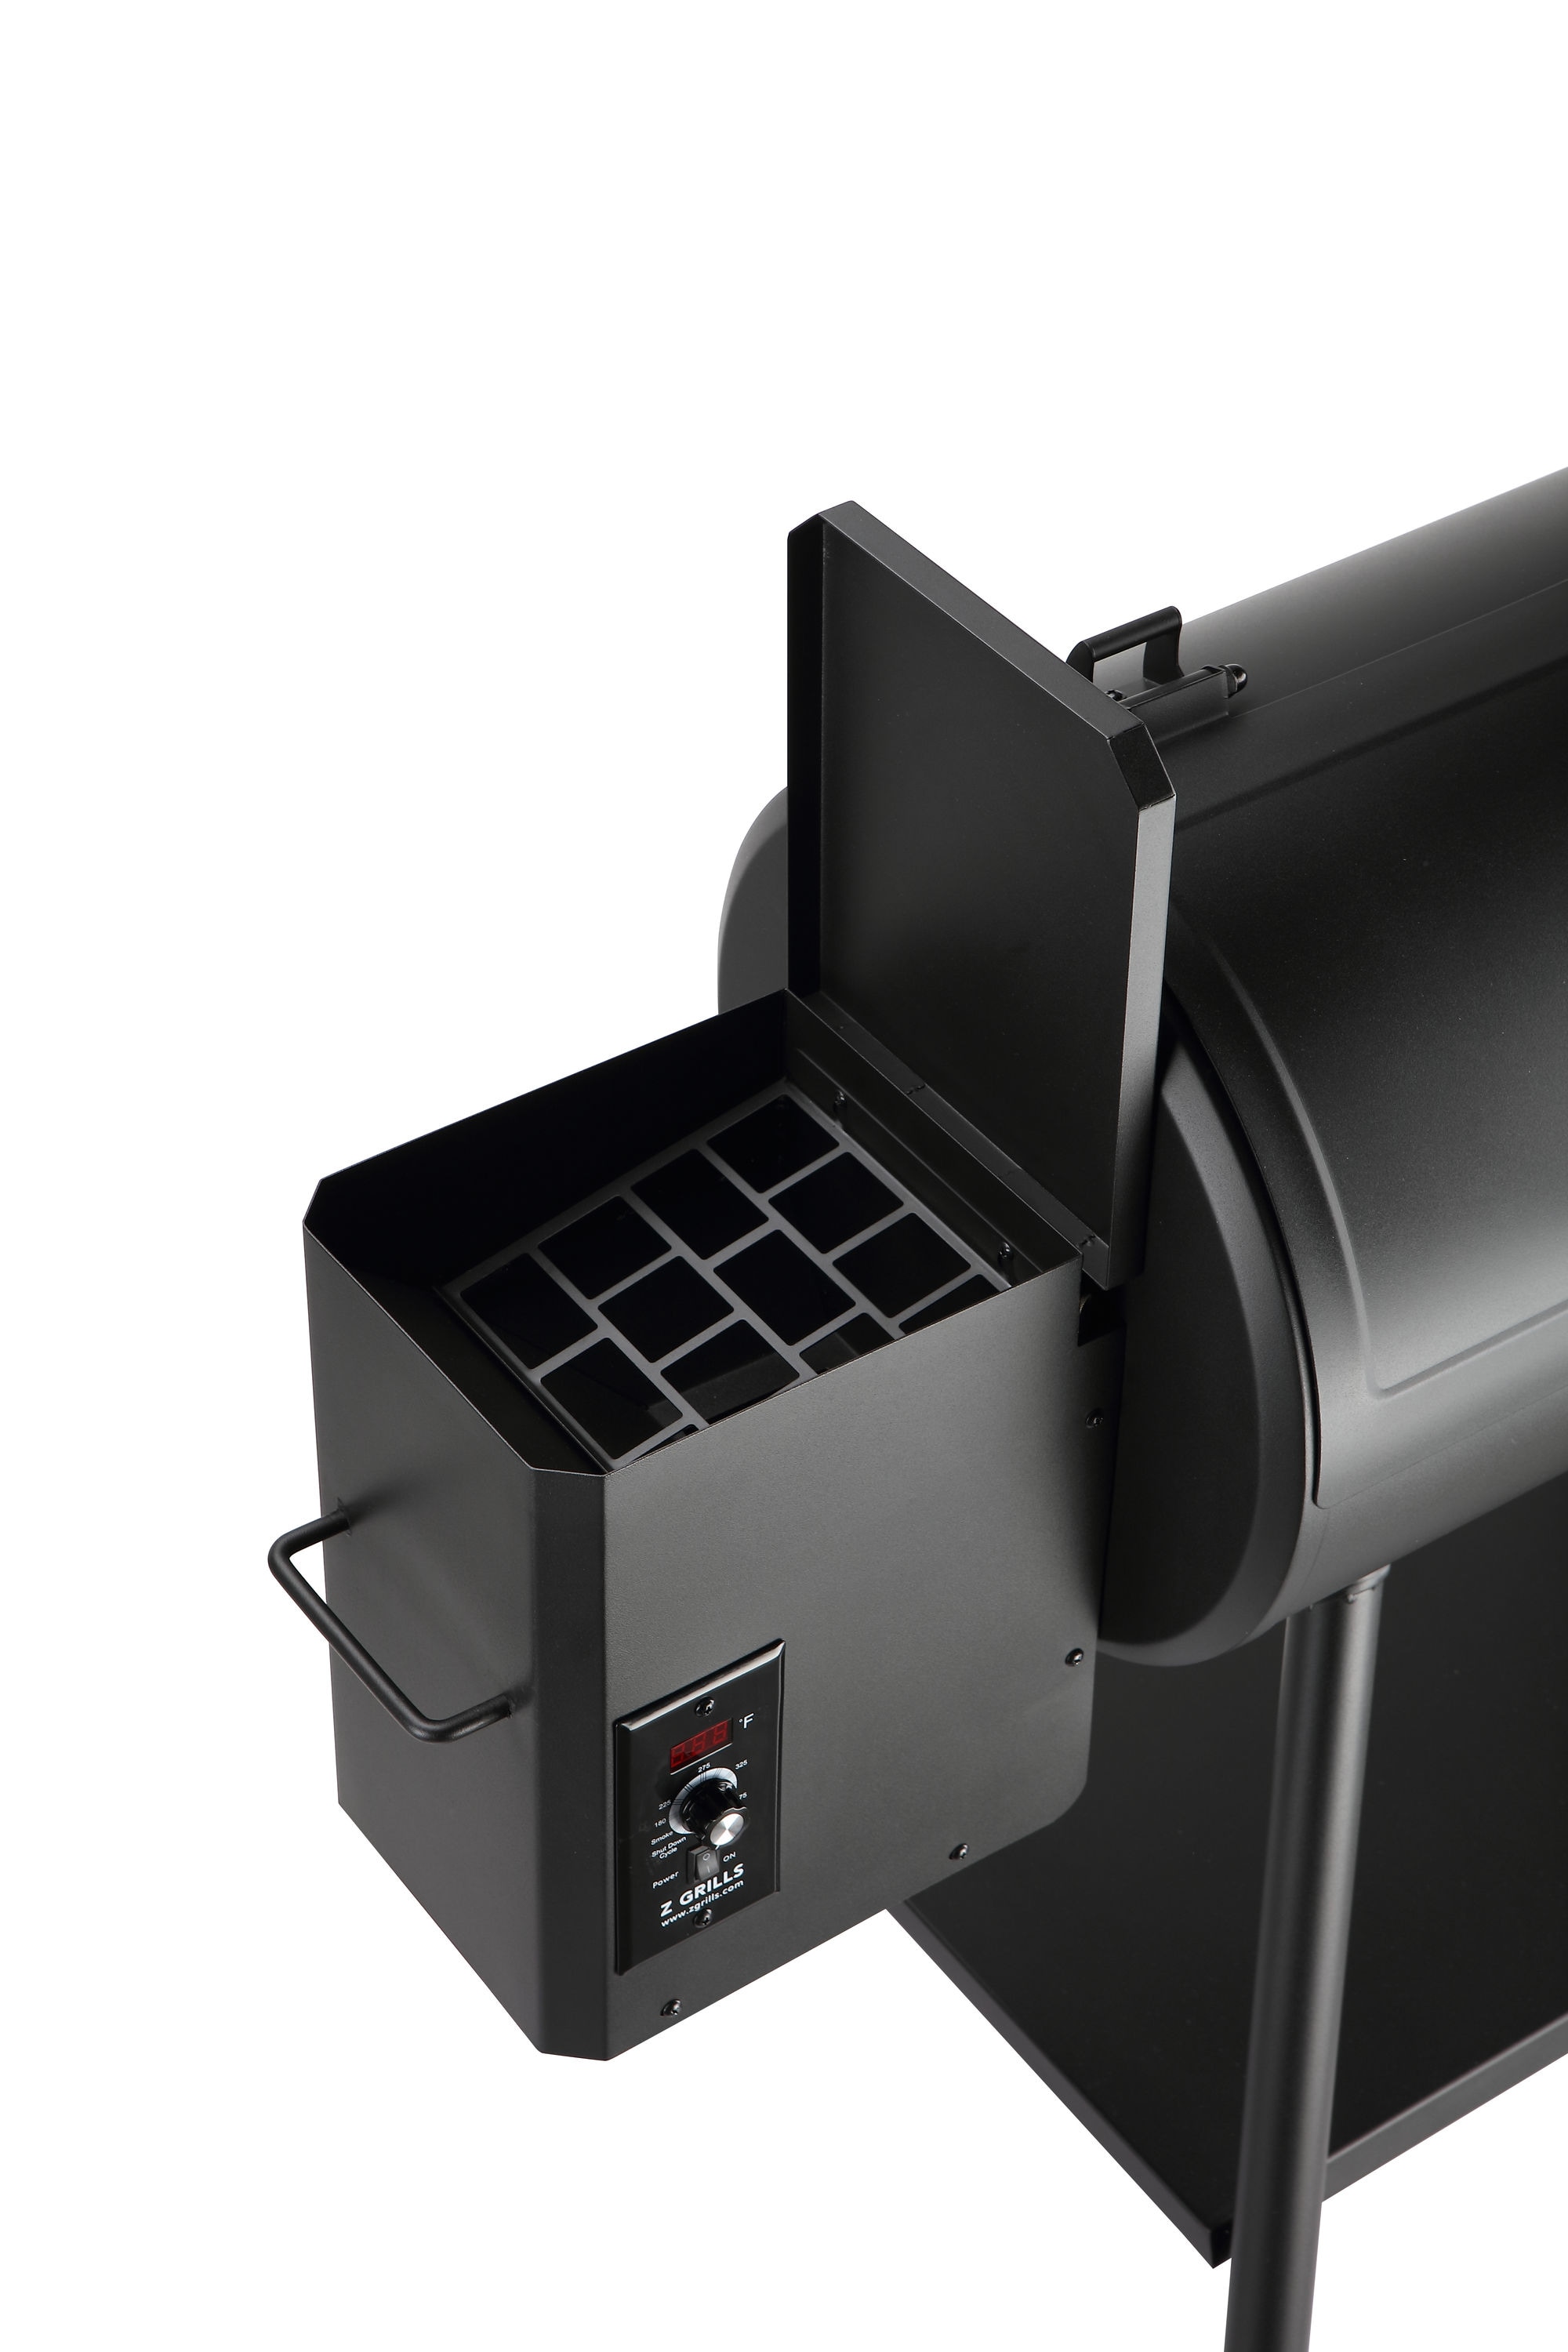 Moda Furnishings Moda Z Grill-550B Outdoor BBQ Smokers with Digital Controller - Smokers with 1 Wood Pellet - Smokers with 1 Wood Pellet